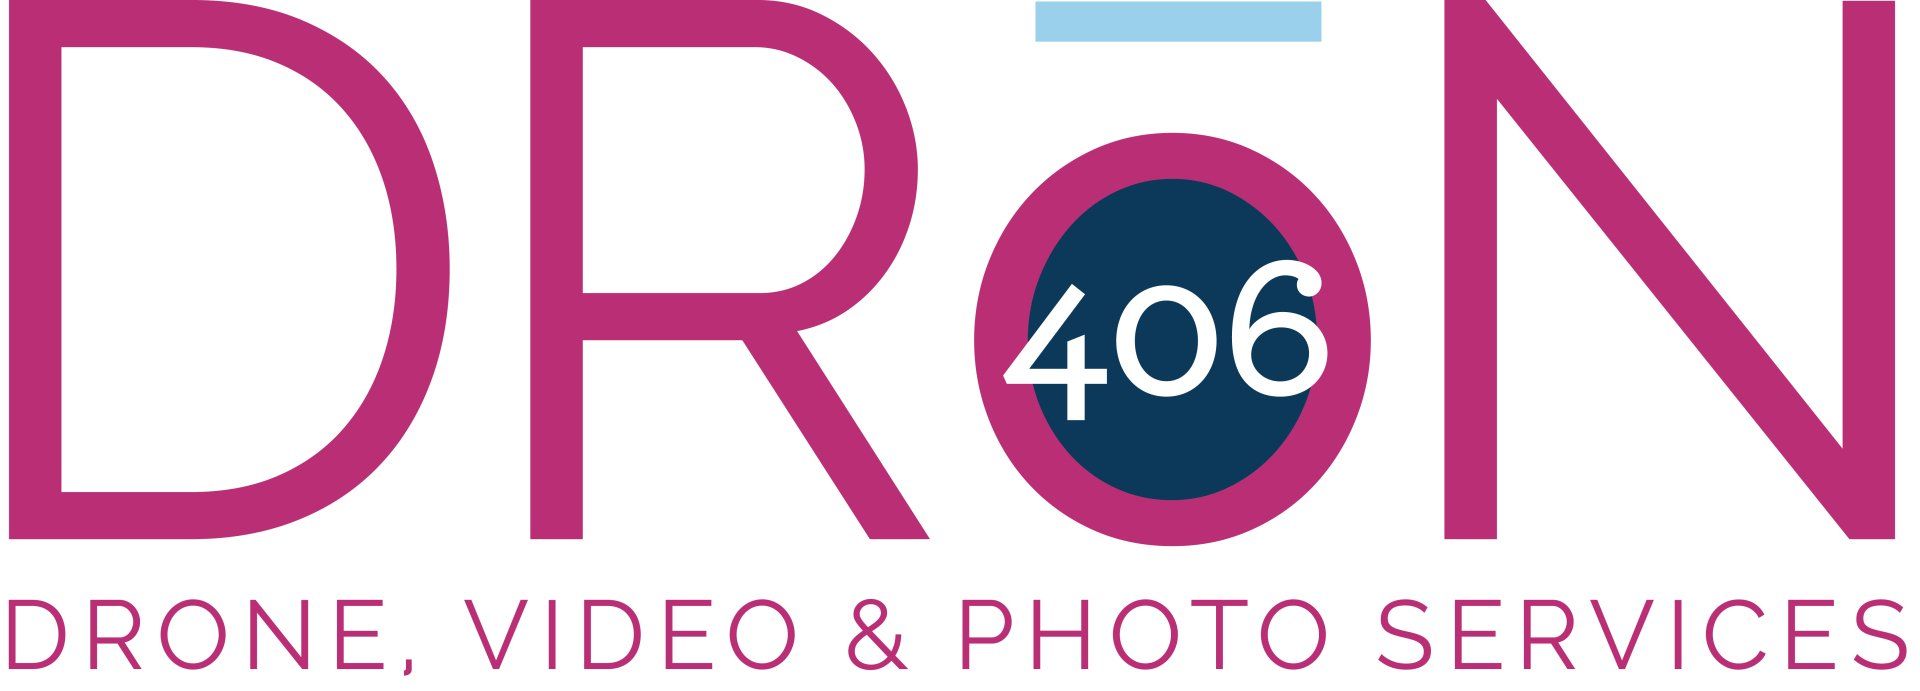 DRōN 406
drone video and photo services logo